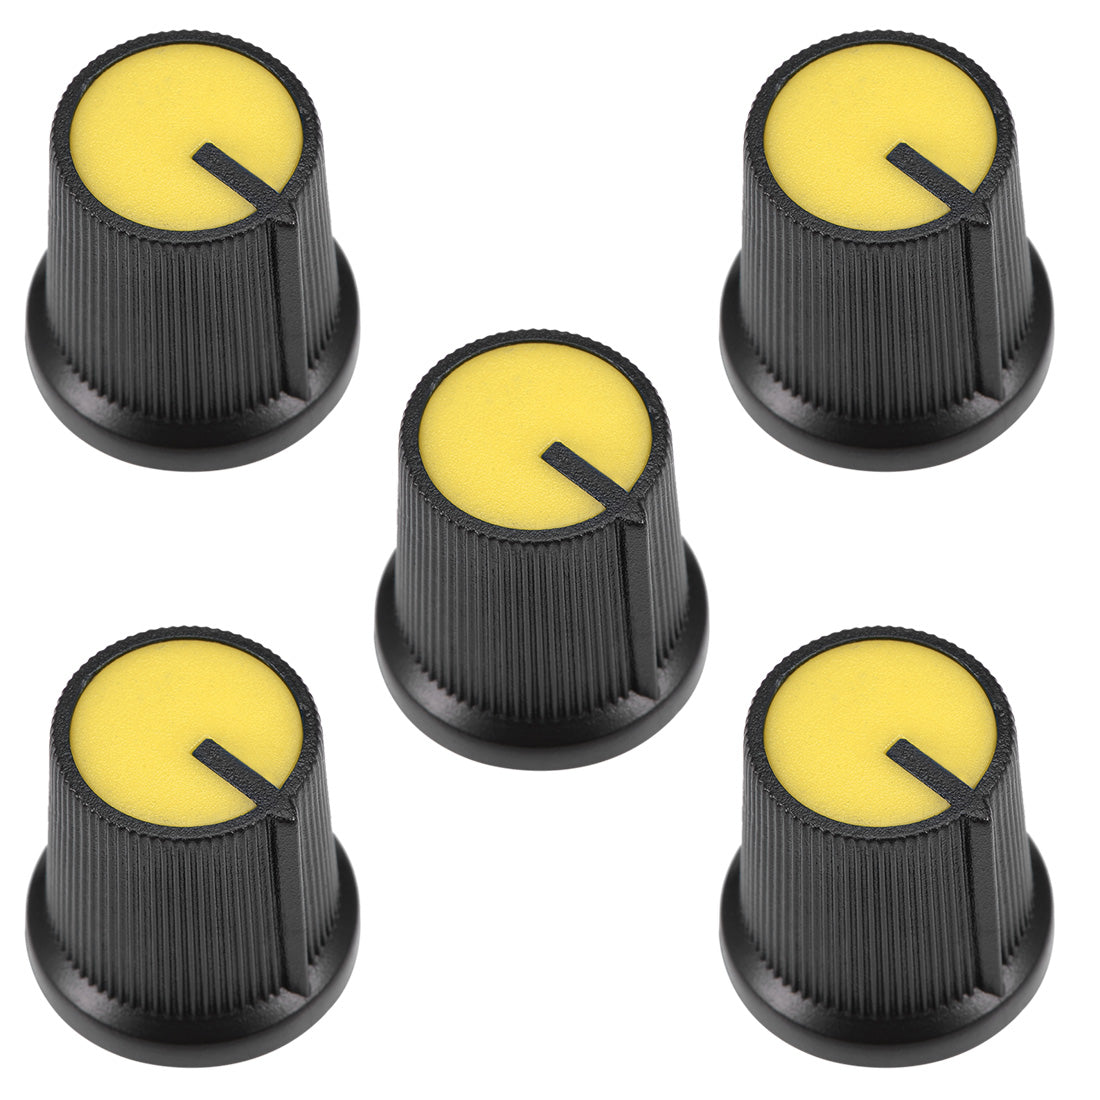 Uxcell Uxcell 5Pcs 15x15mm Plastic Potentiometer Volume Control Rotary Knob Knurled Shaft Hole Yellow